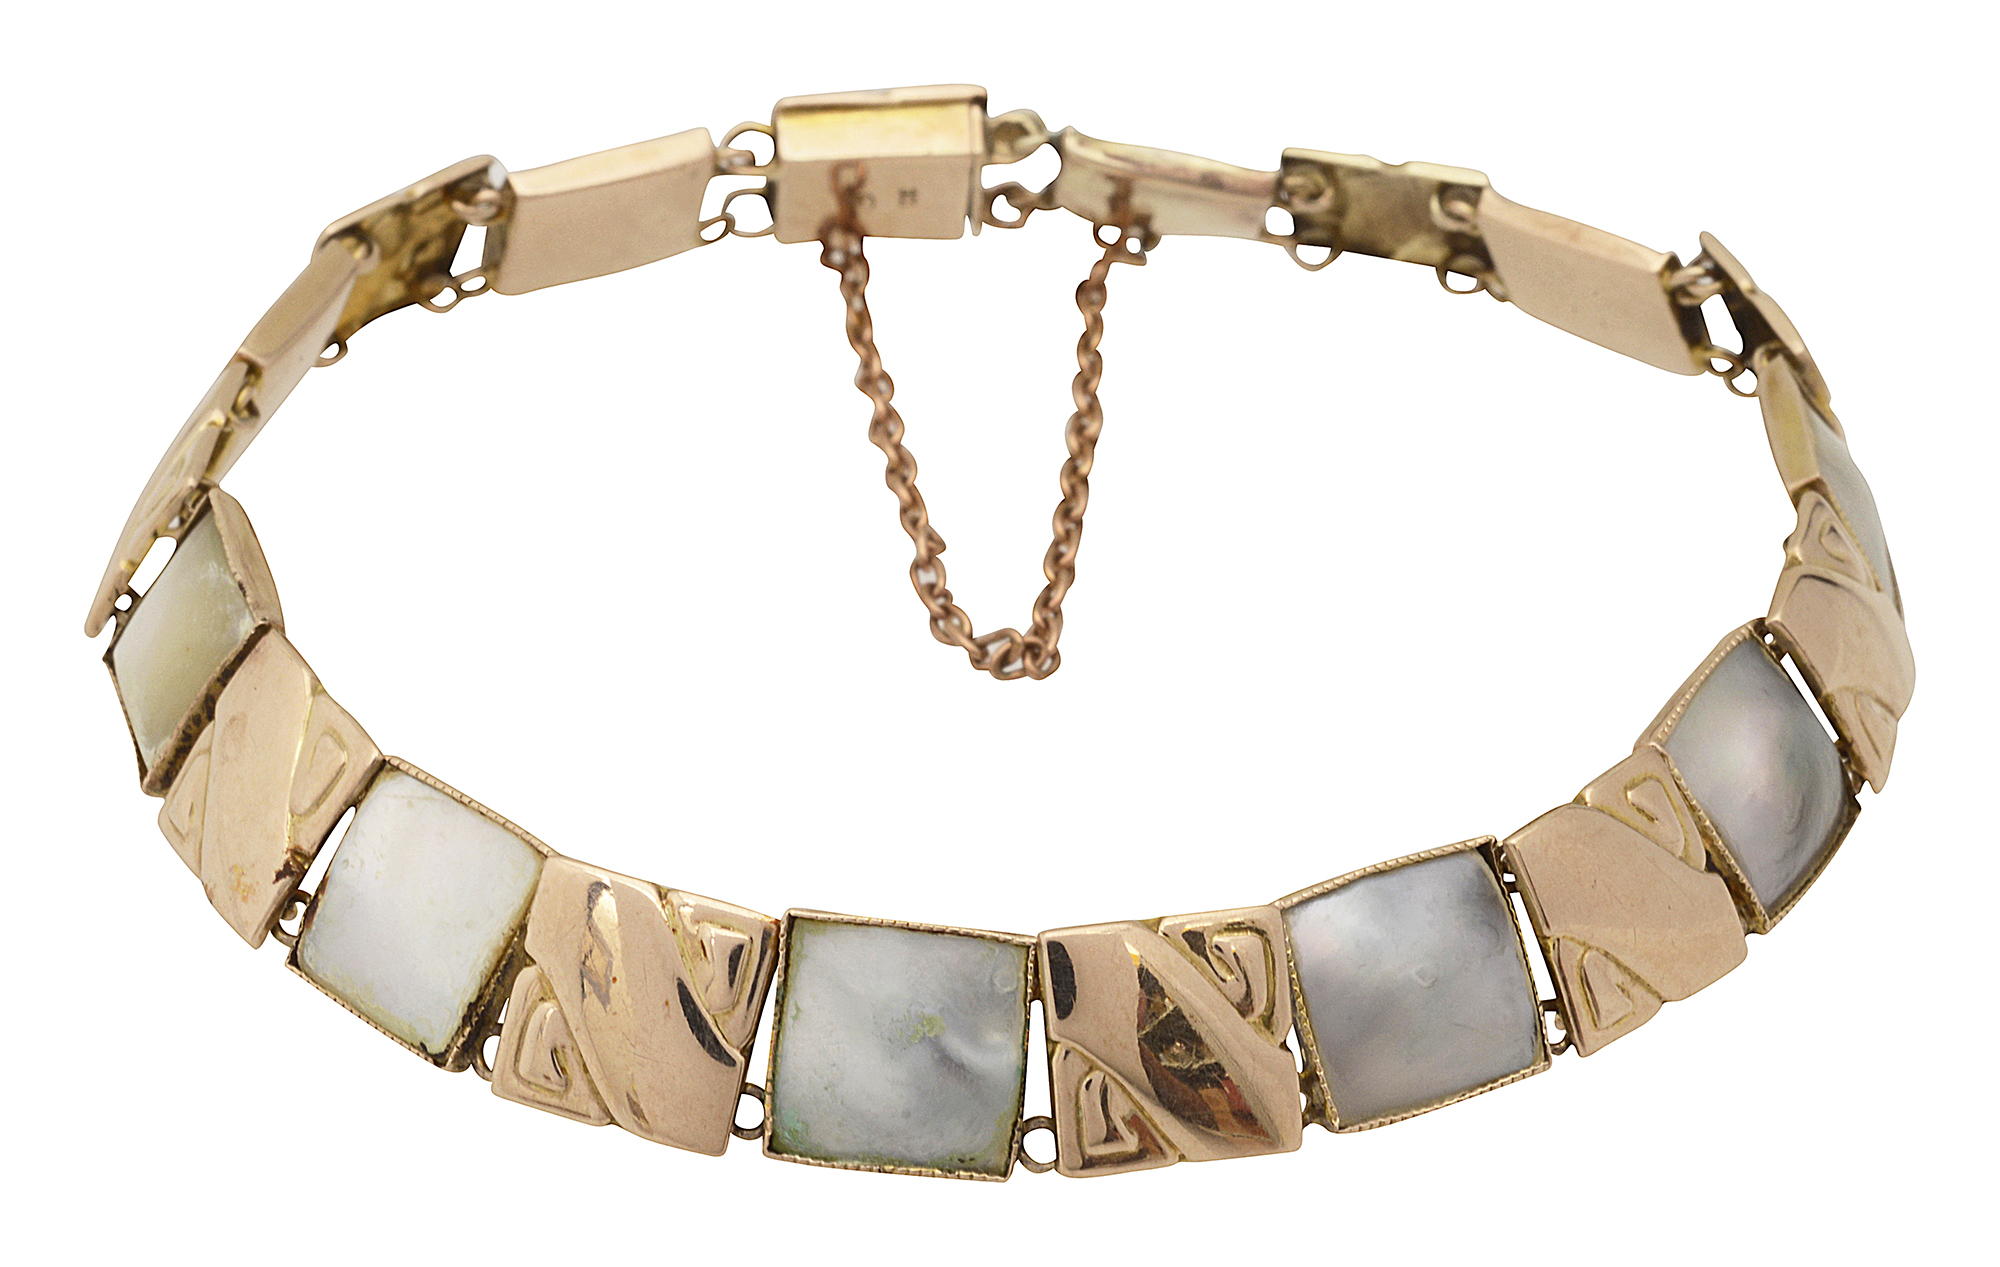 A Murrle, Bennett & Co 9ct gold and mother of pearl bracelet